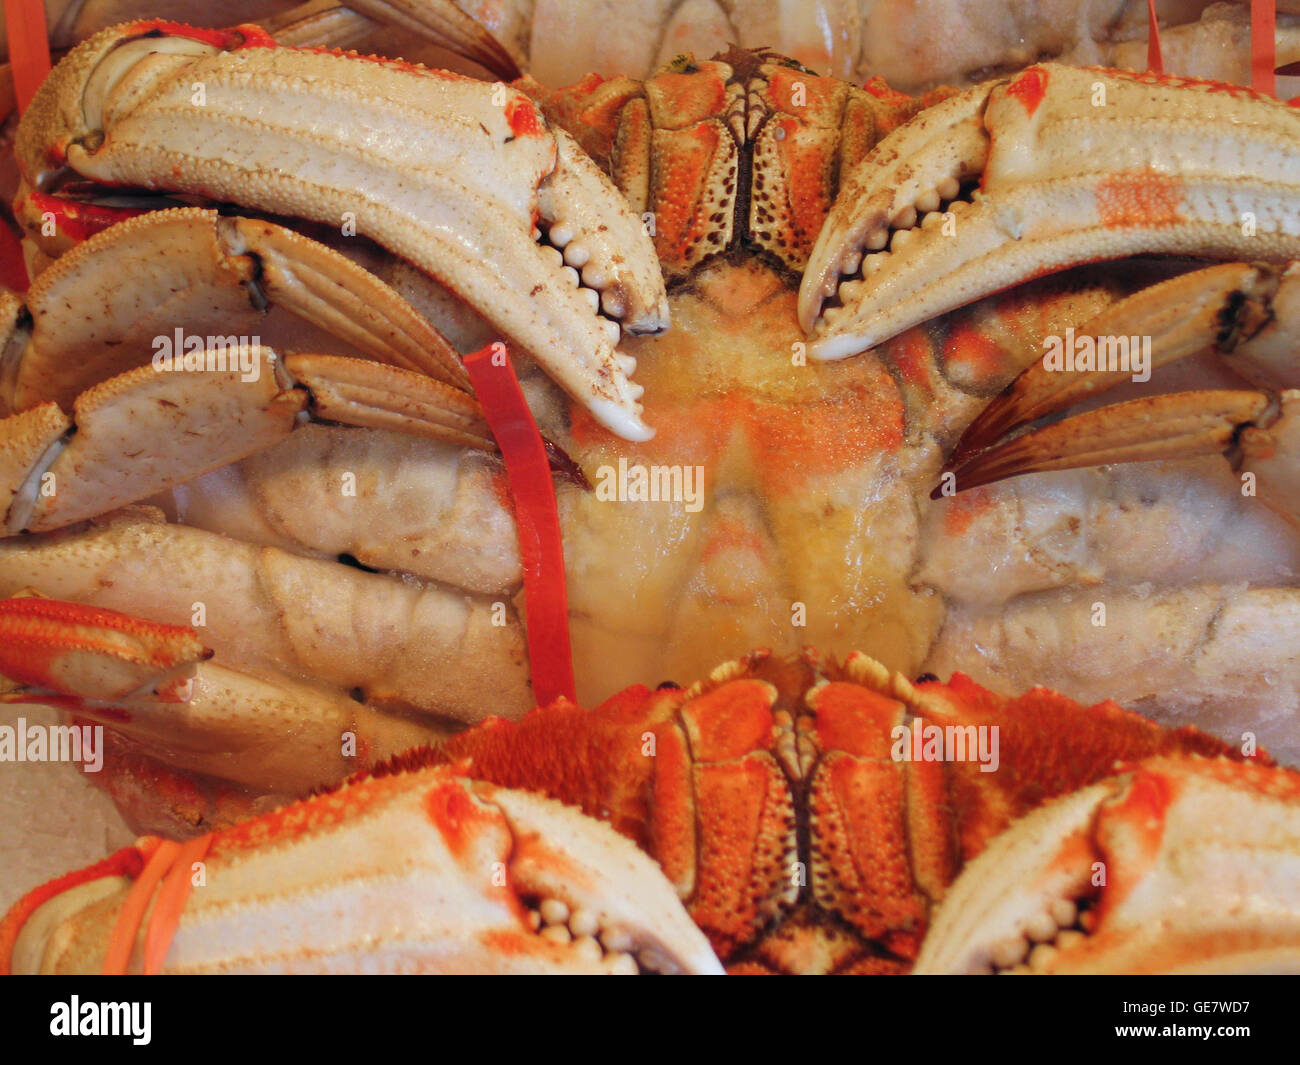 A close up image of red crabs, on sale at Seattle Washington's Fish Market on Puget Sound. Stock Photo